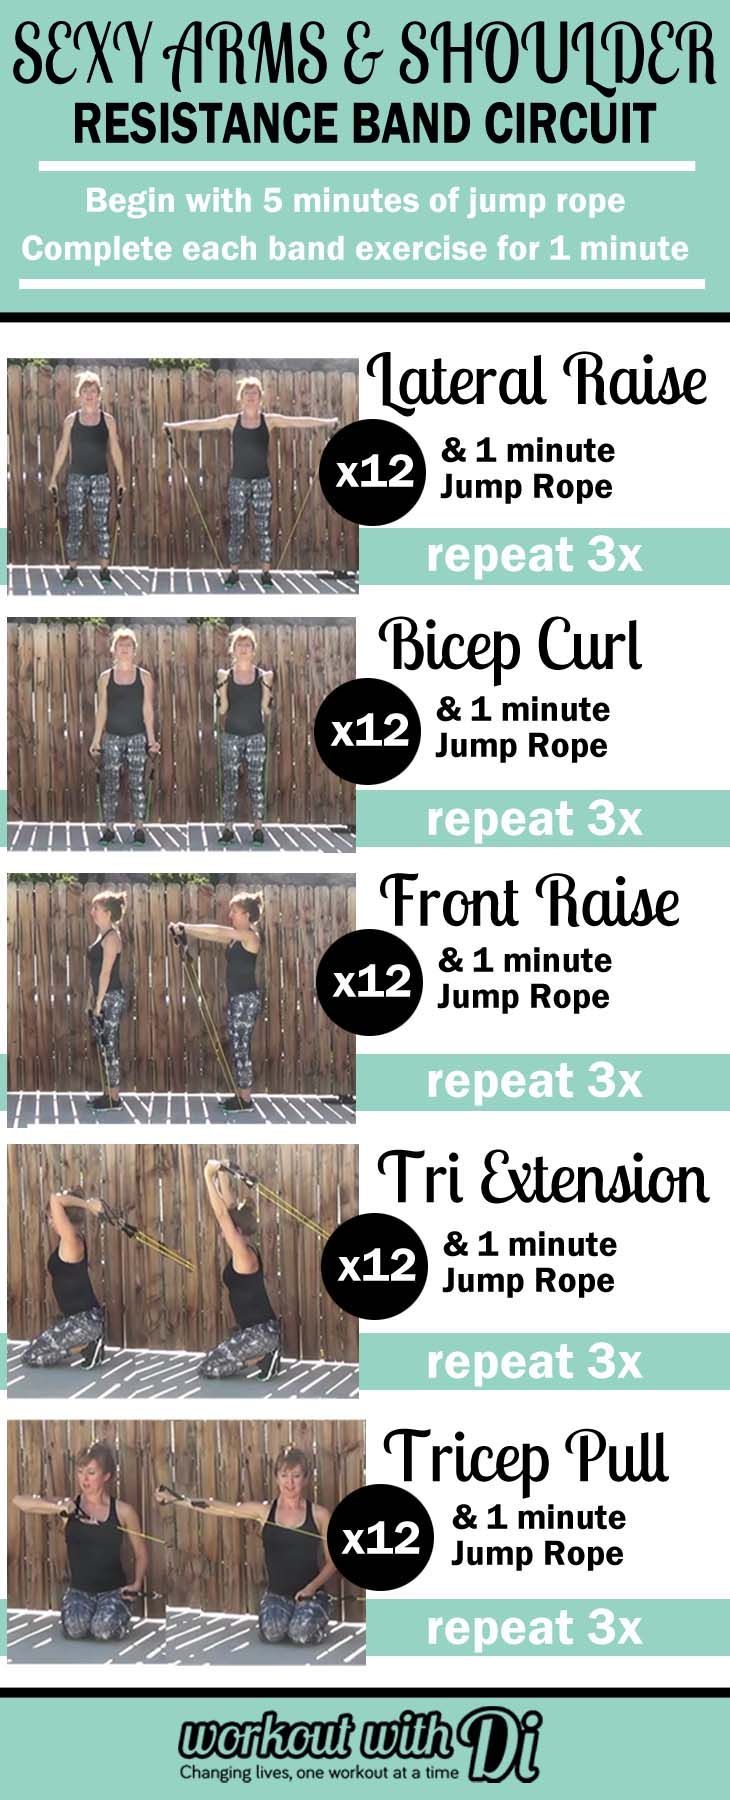 Sexy Arms and Shoulder Resistance Band Circuit workout.